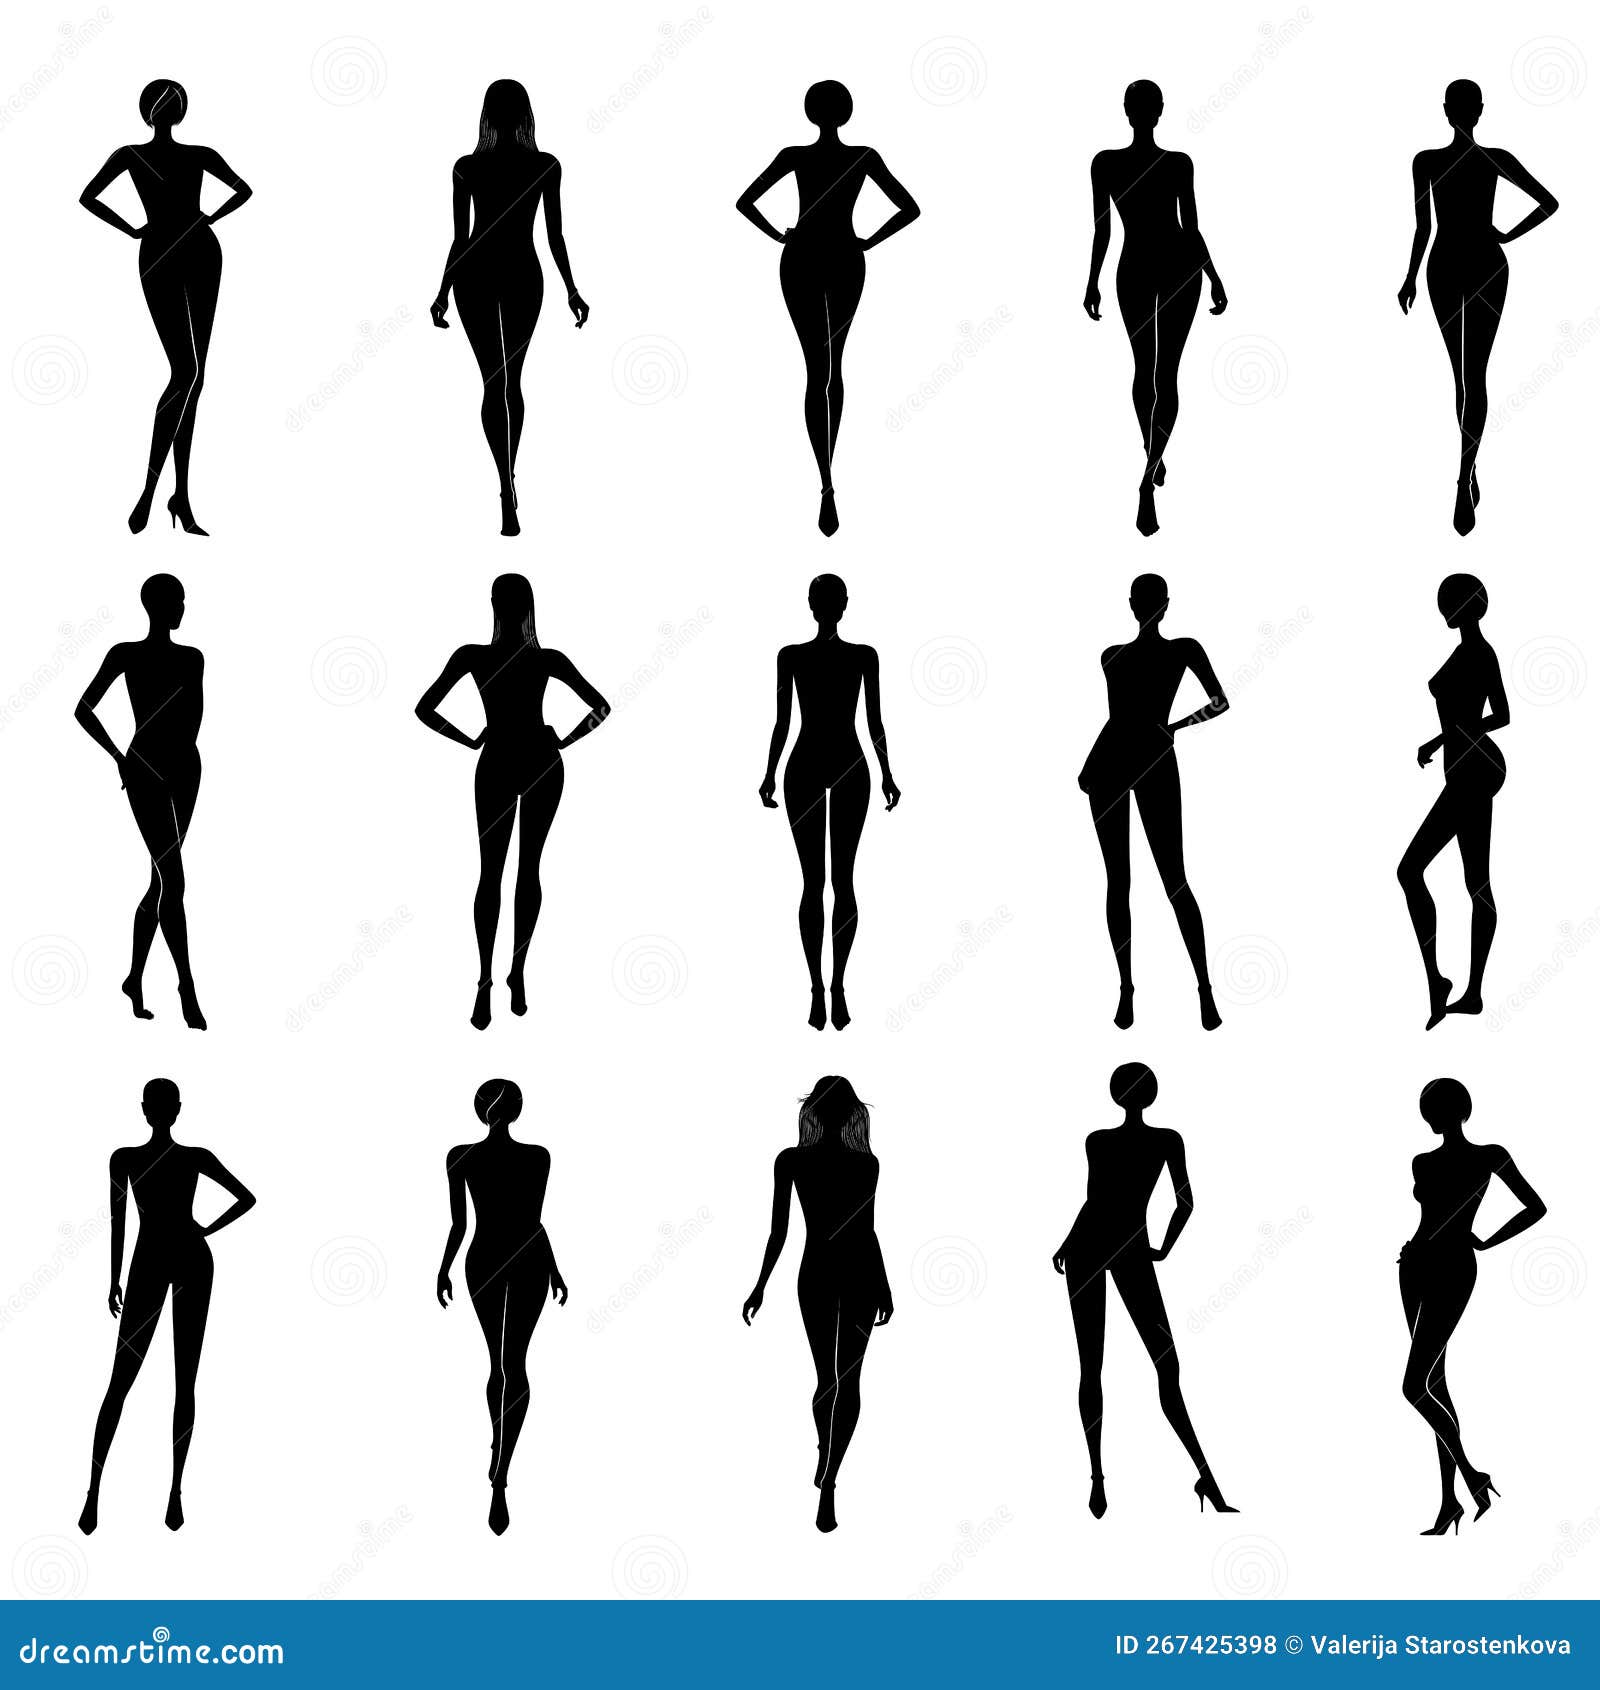 Fashion Illustration of Female Body Silhouettes in Black Color, Vector ...